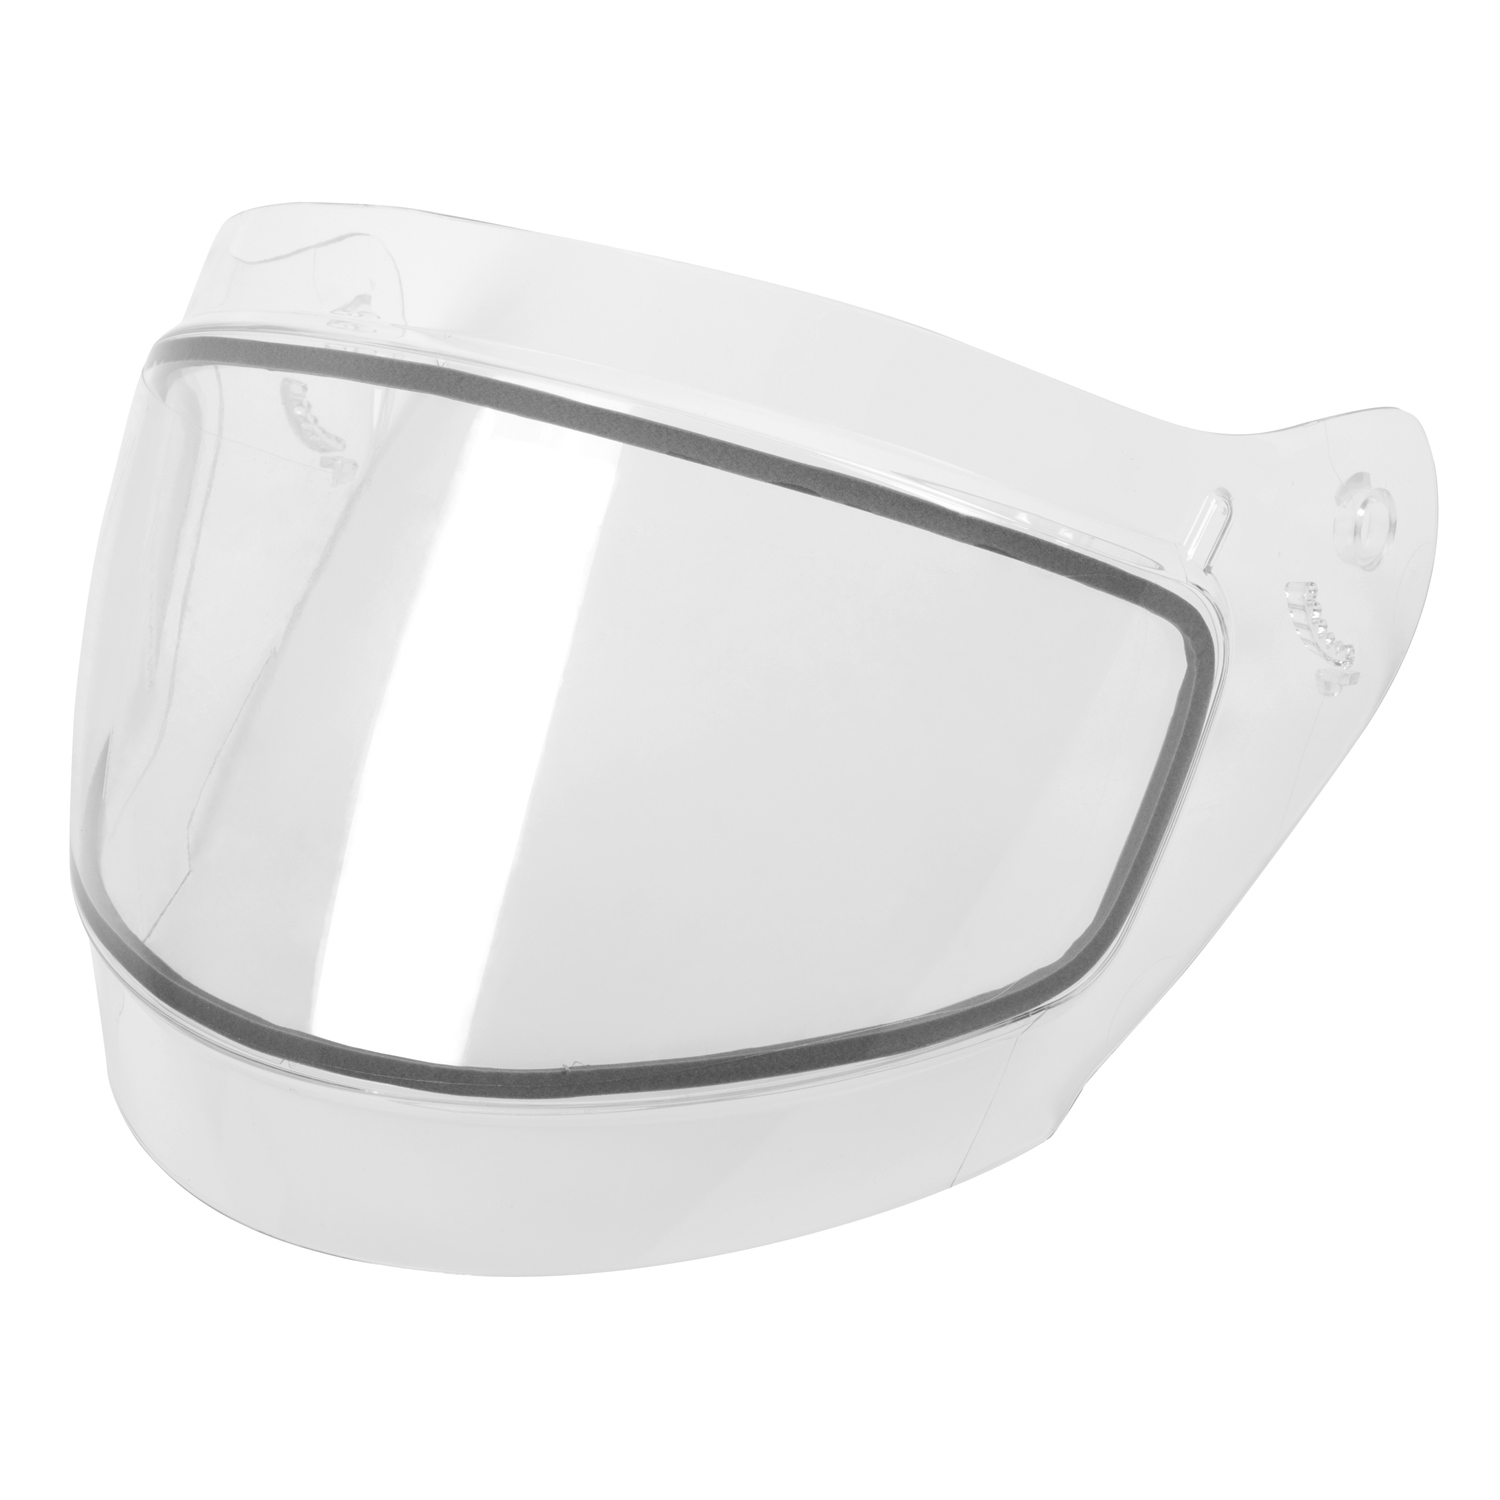 Electric Shield Double Lens for Snowmobile Helmet Kimpex CKX VG-975 